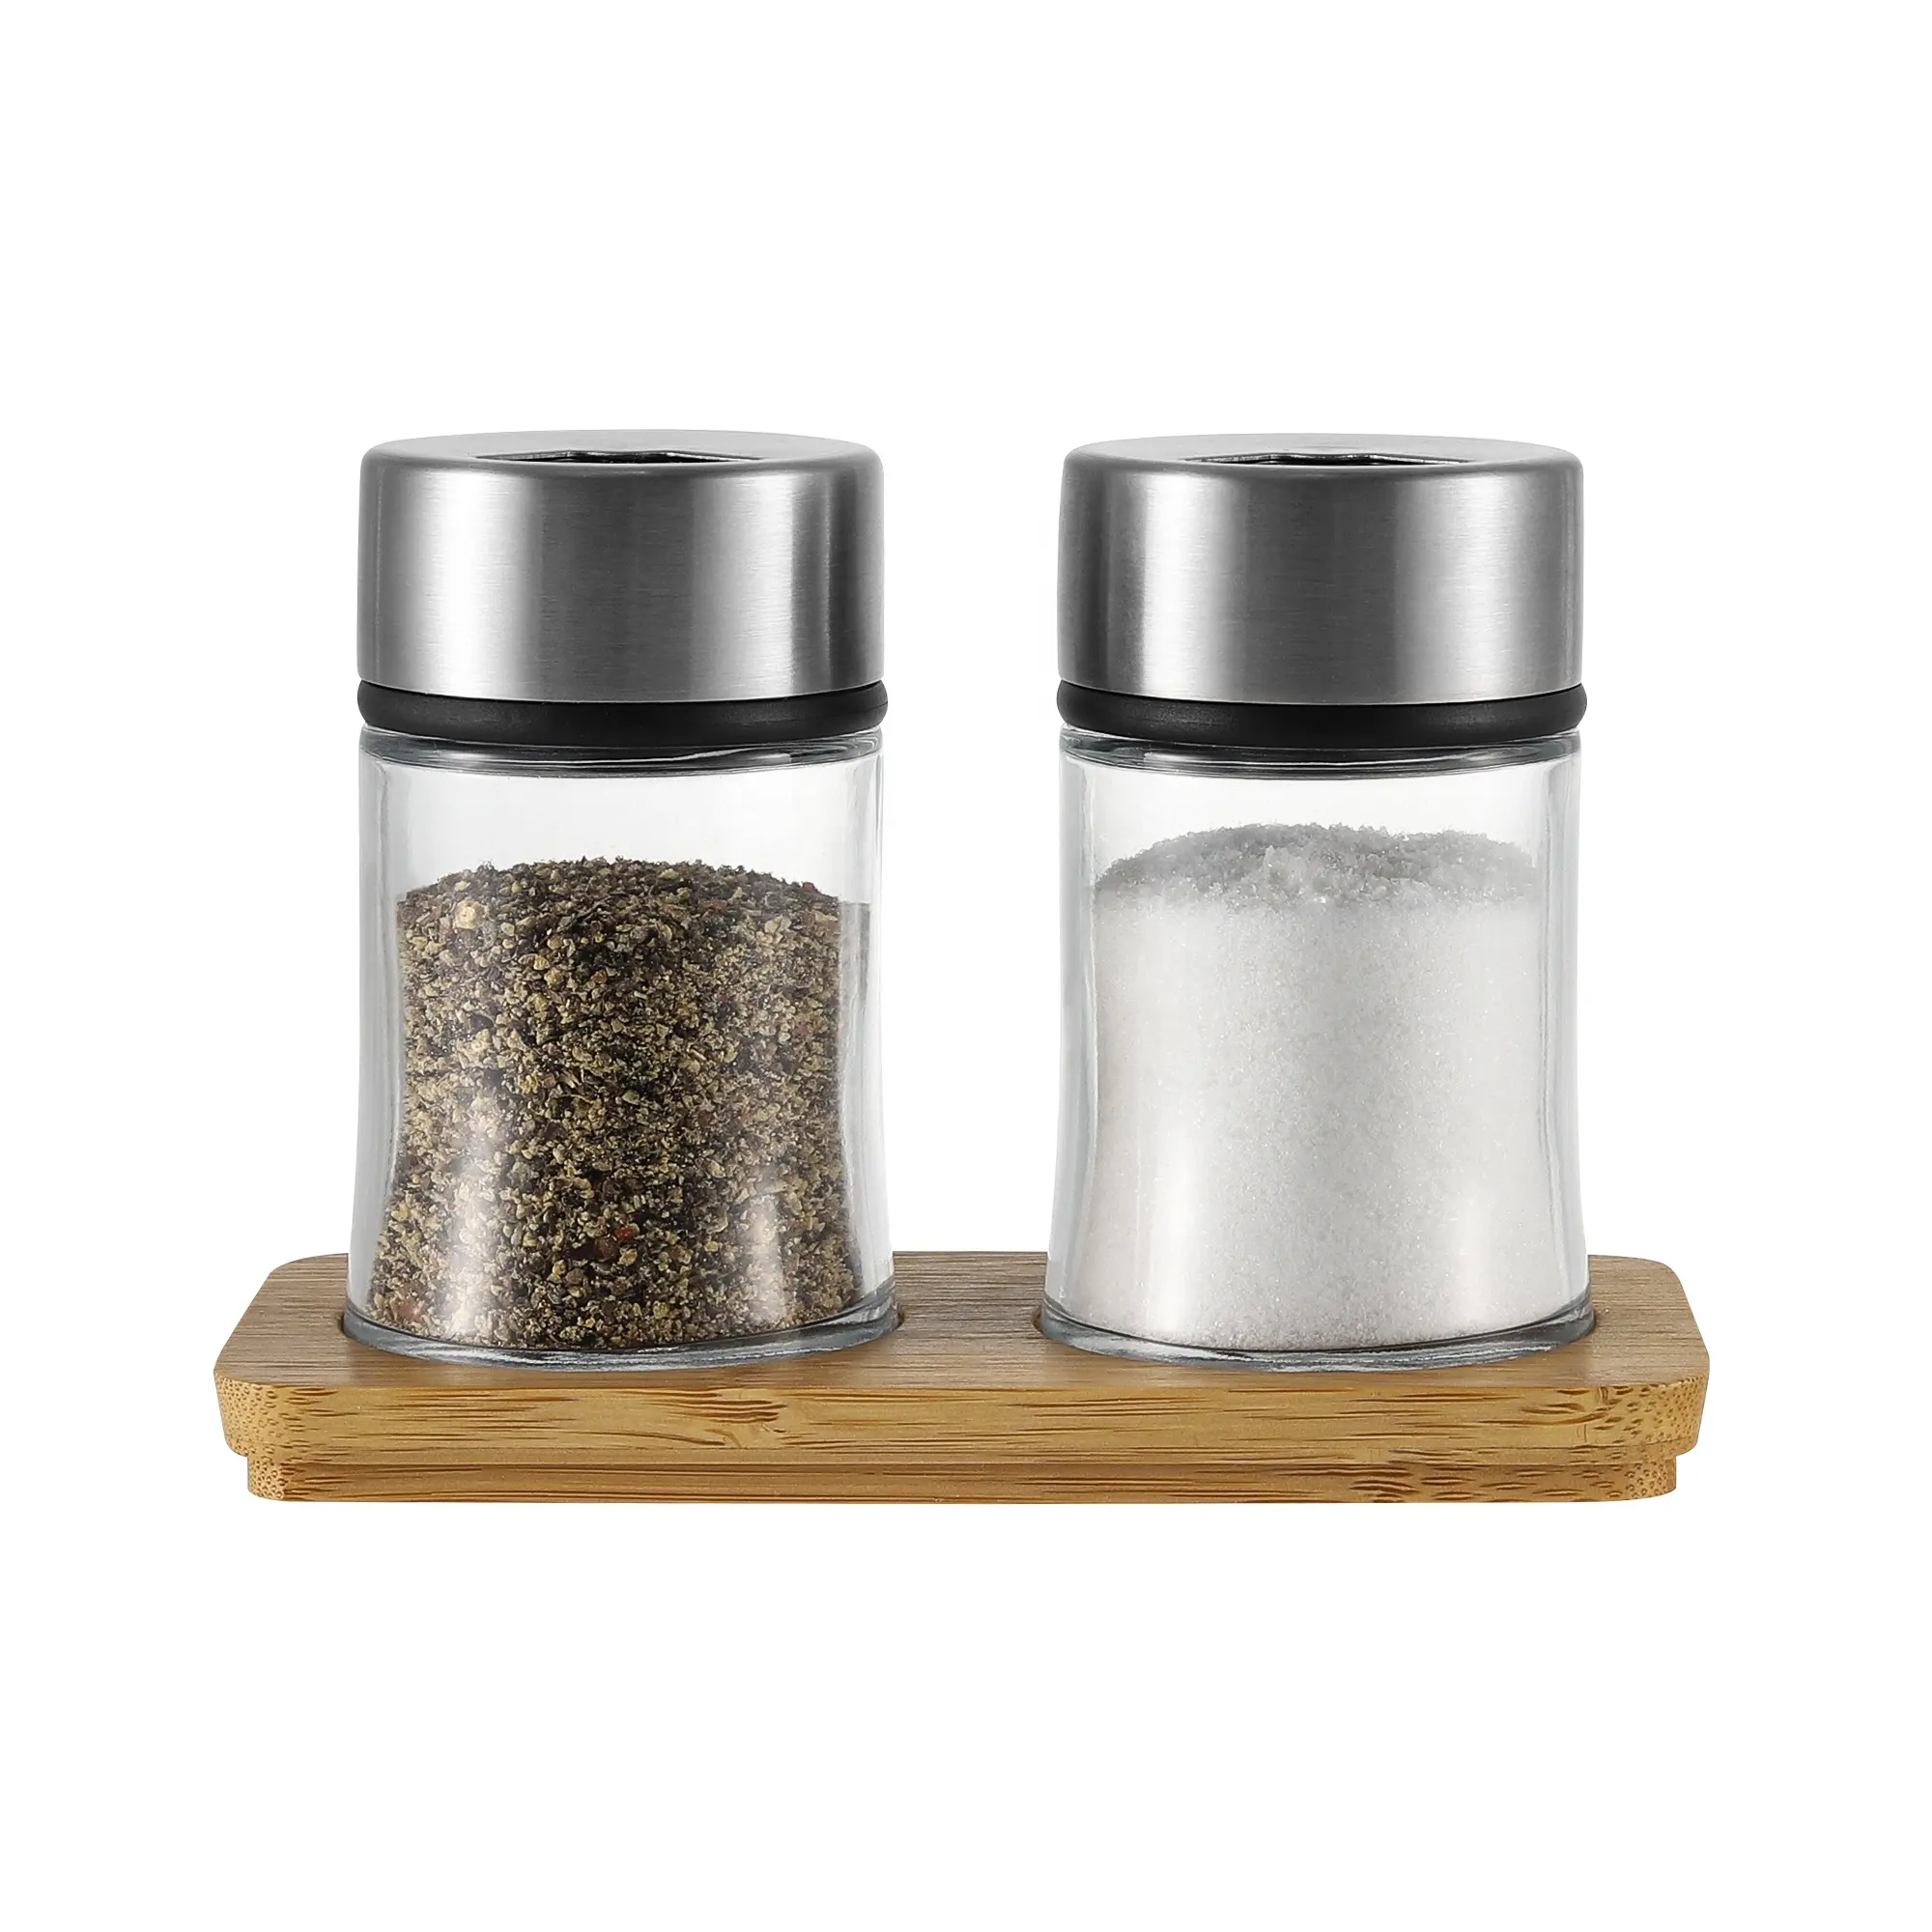 Set Of 2 Salt And Pepper Shakers Stainless Steel Glass With Lids For Storing Spices And Spices And Seasonings With Bamboo Base